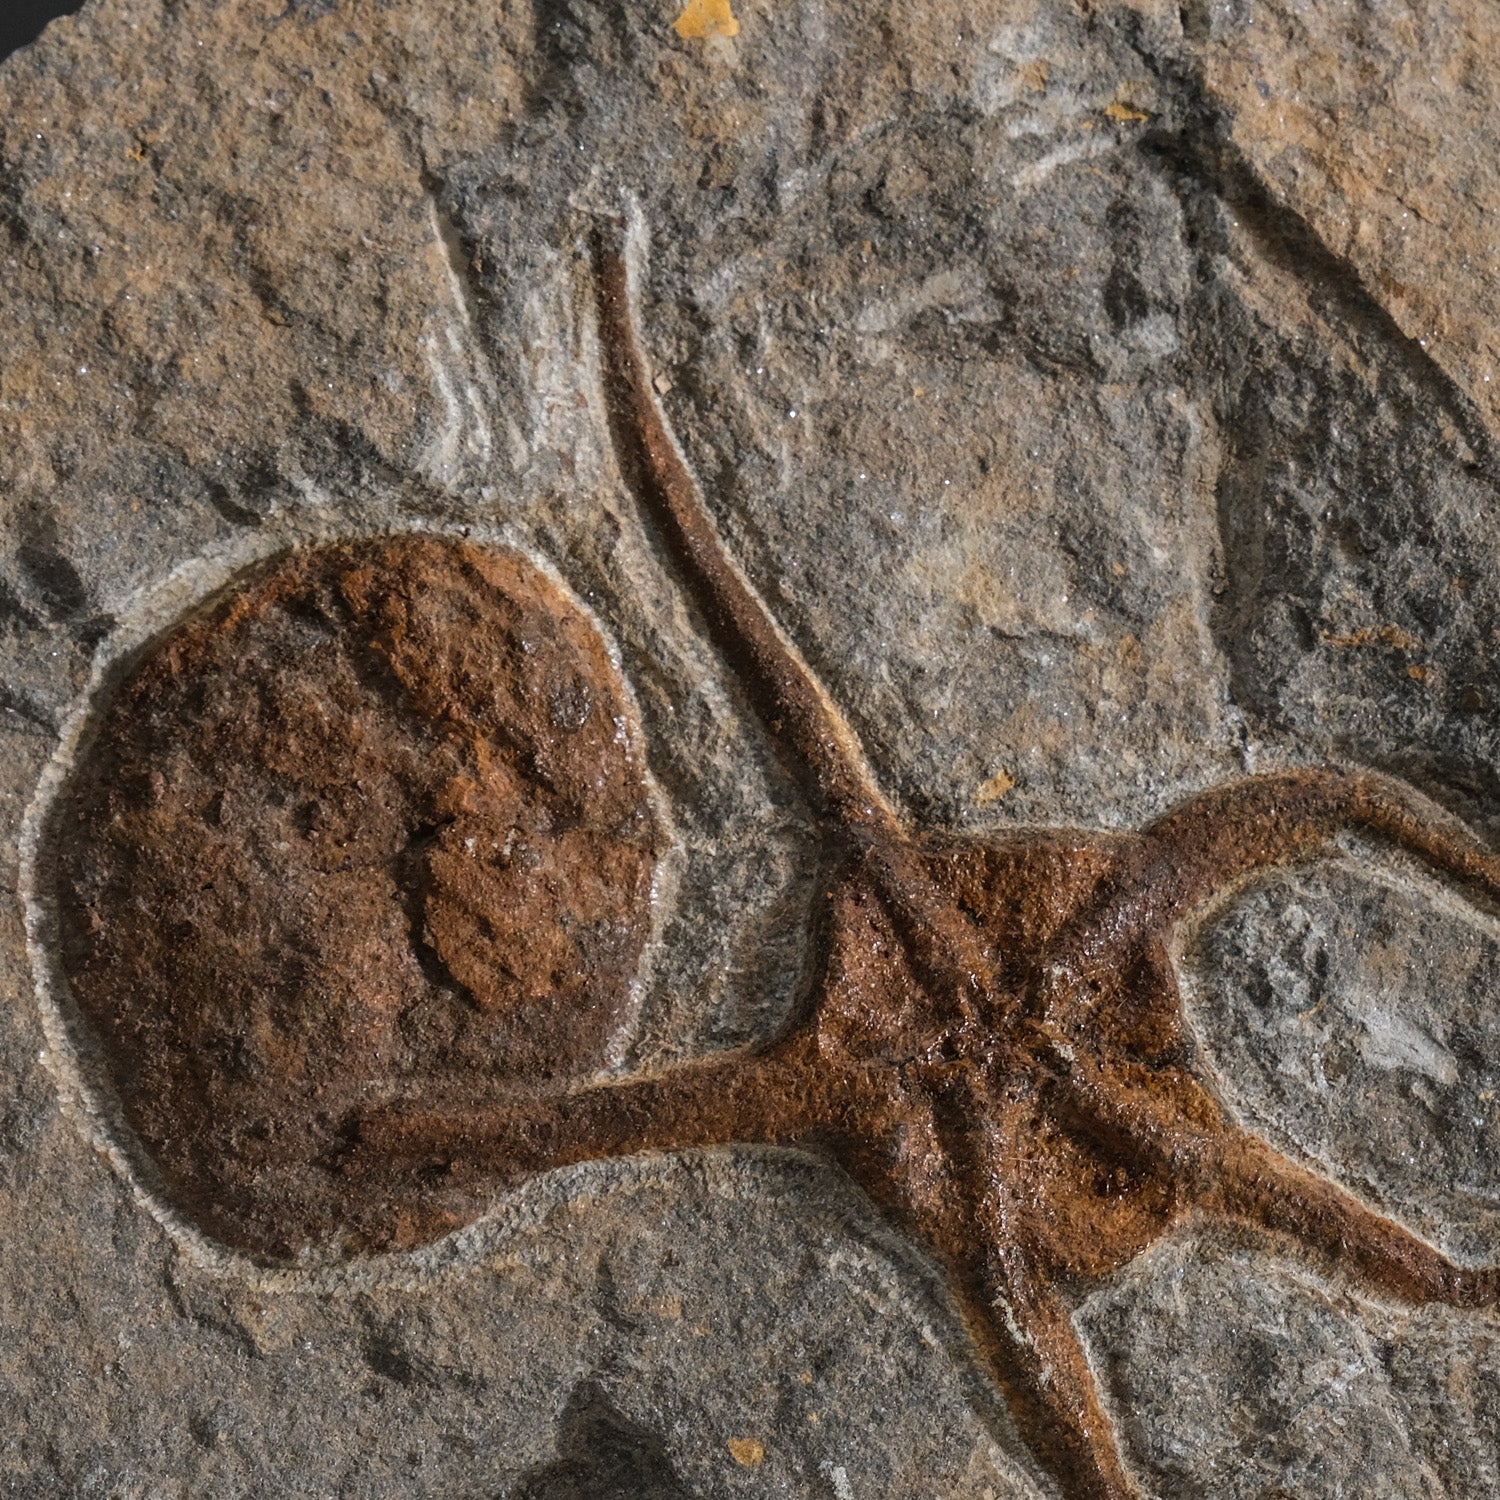 Ophiuroidea Brittle Star Fossil (1.2 lbs)